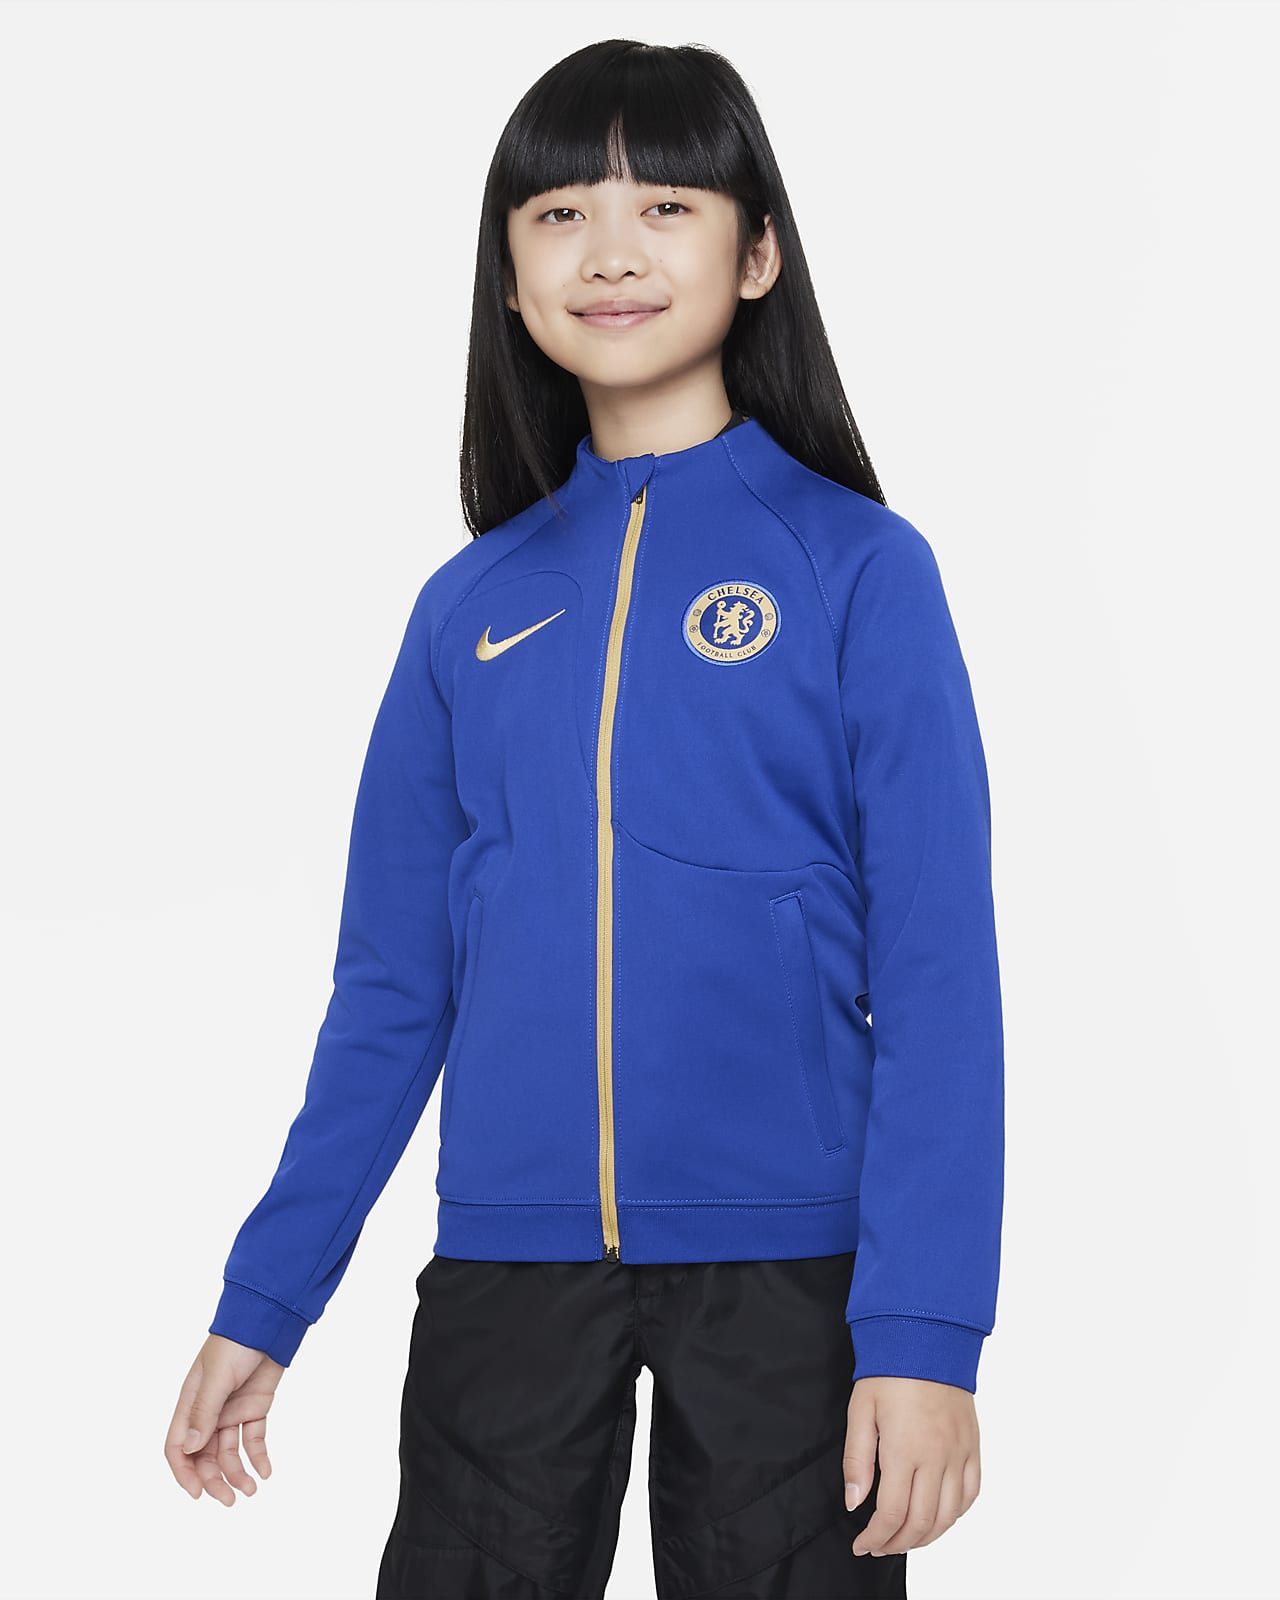 Chelsea F.C. Academy Pro Younger Kids' Knit Football Jacket